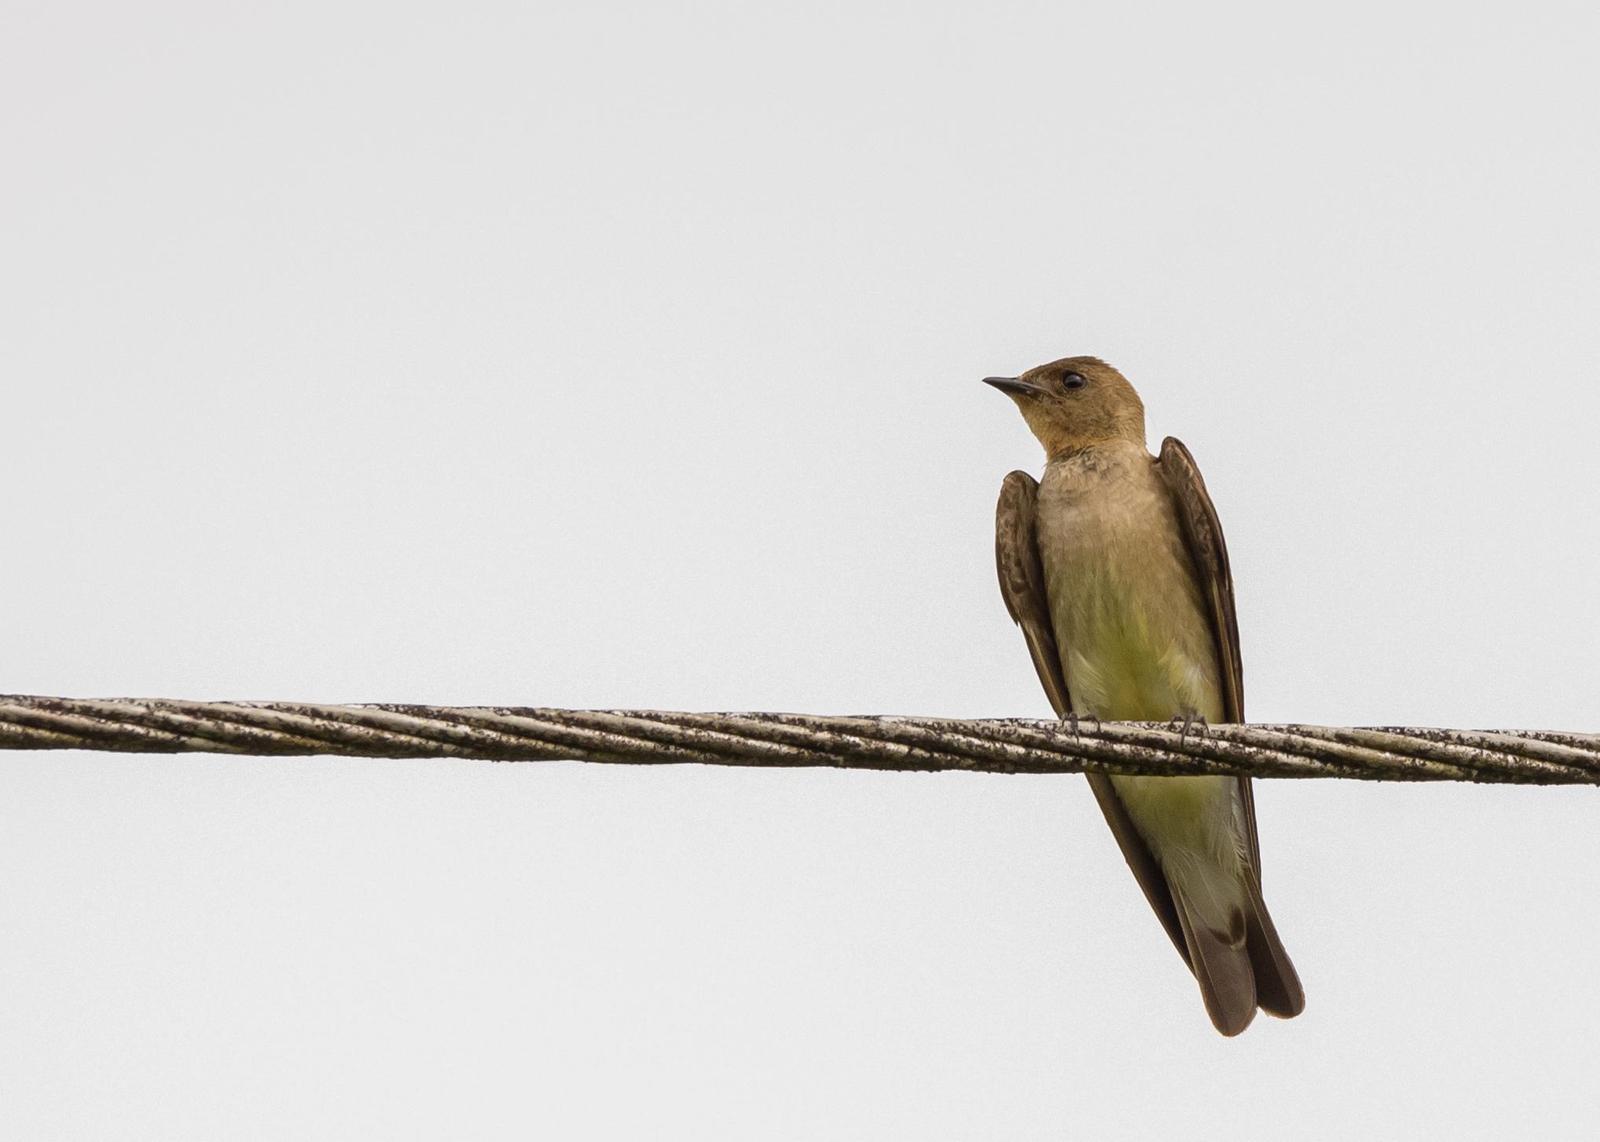 Southern Rough-winged Swallow Photo by Keshava Mysore